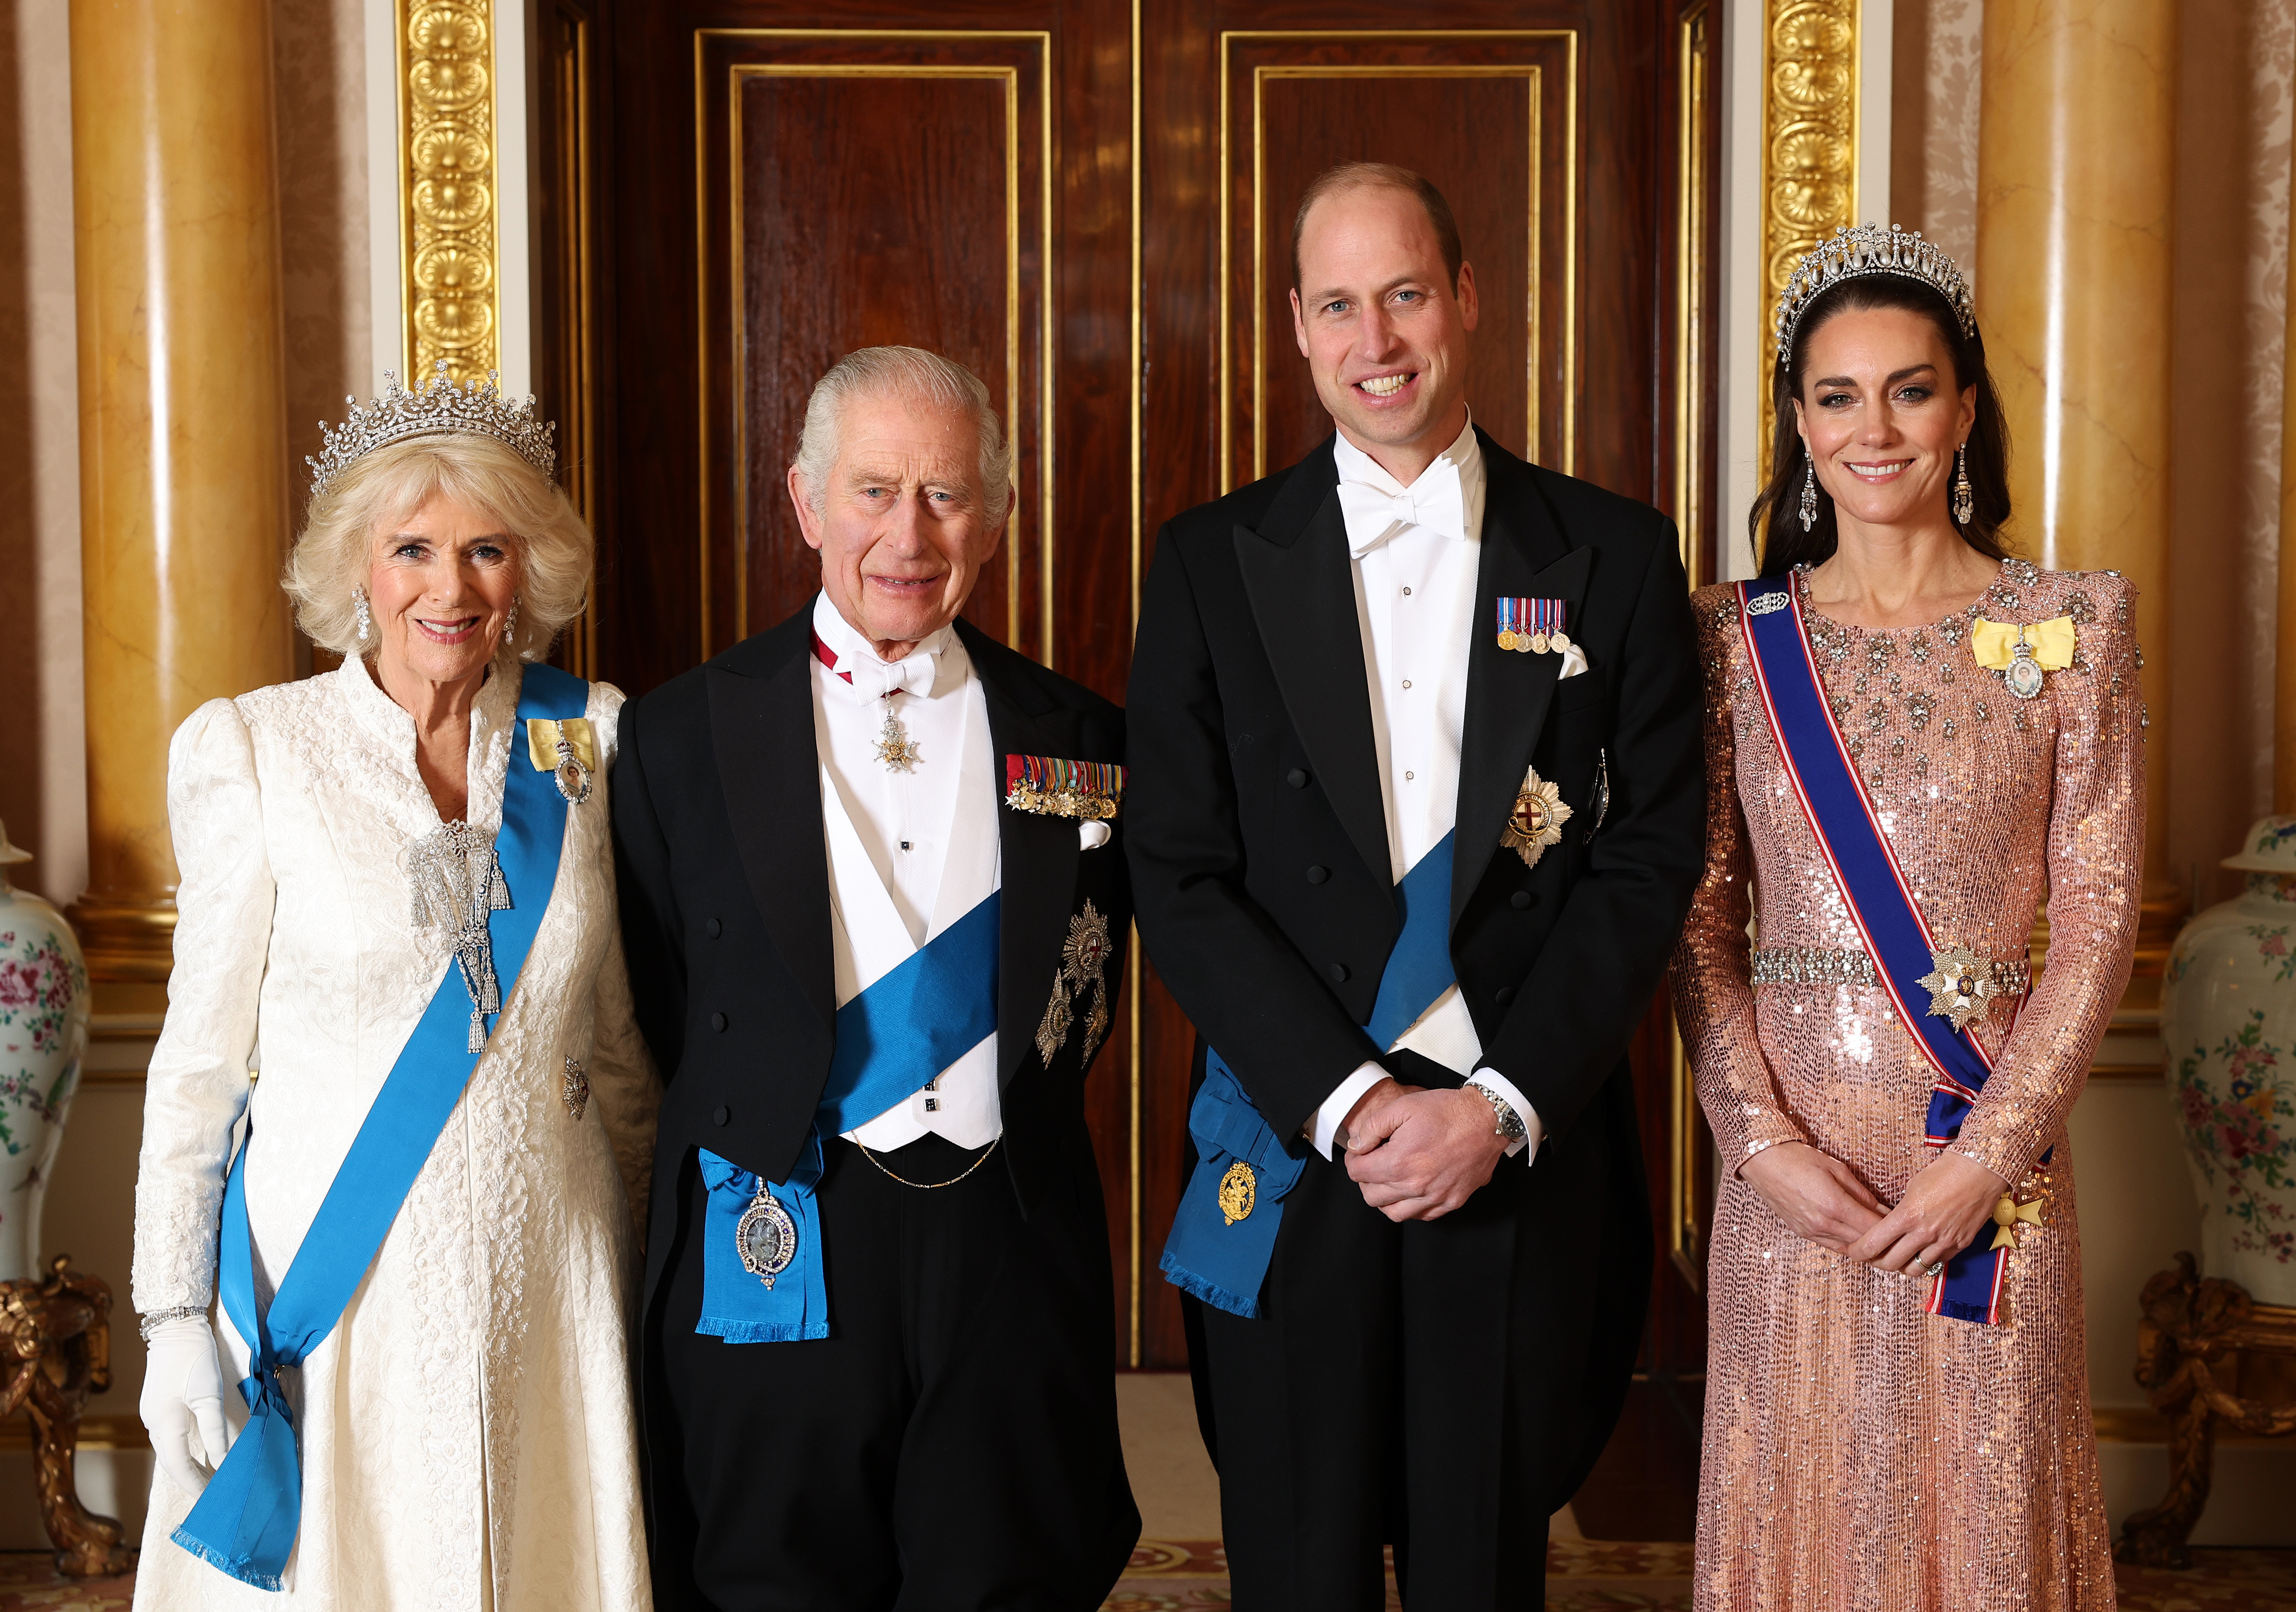 Queen Camilla, King Charles III, Prince William, Prince of Wales, and Catherine, Princess of Wales, pose for a photograph ahead of The Diplomatic Reception at Buckingham Palace in London, England on December 05, 2023. | Source: Getty Images